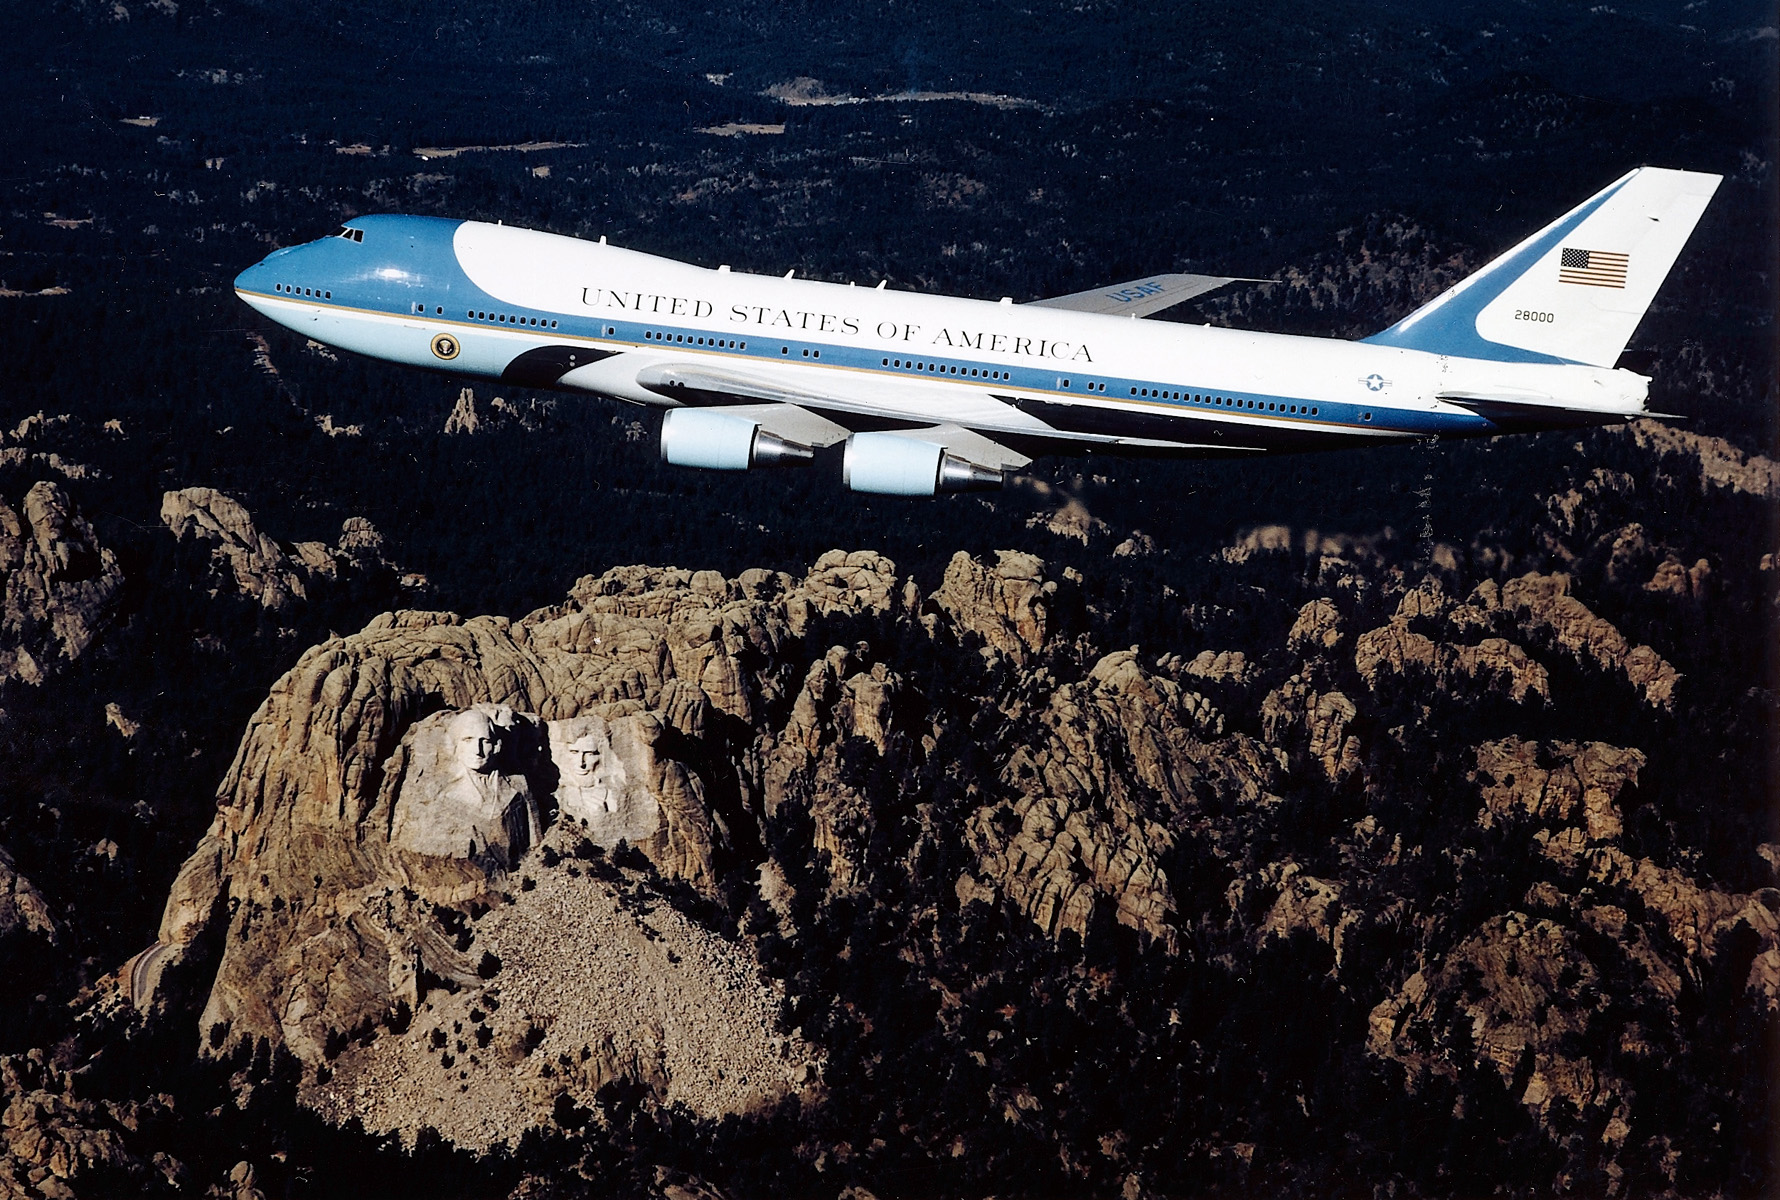 Boeing 747-8 selected as Air Force One